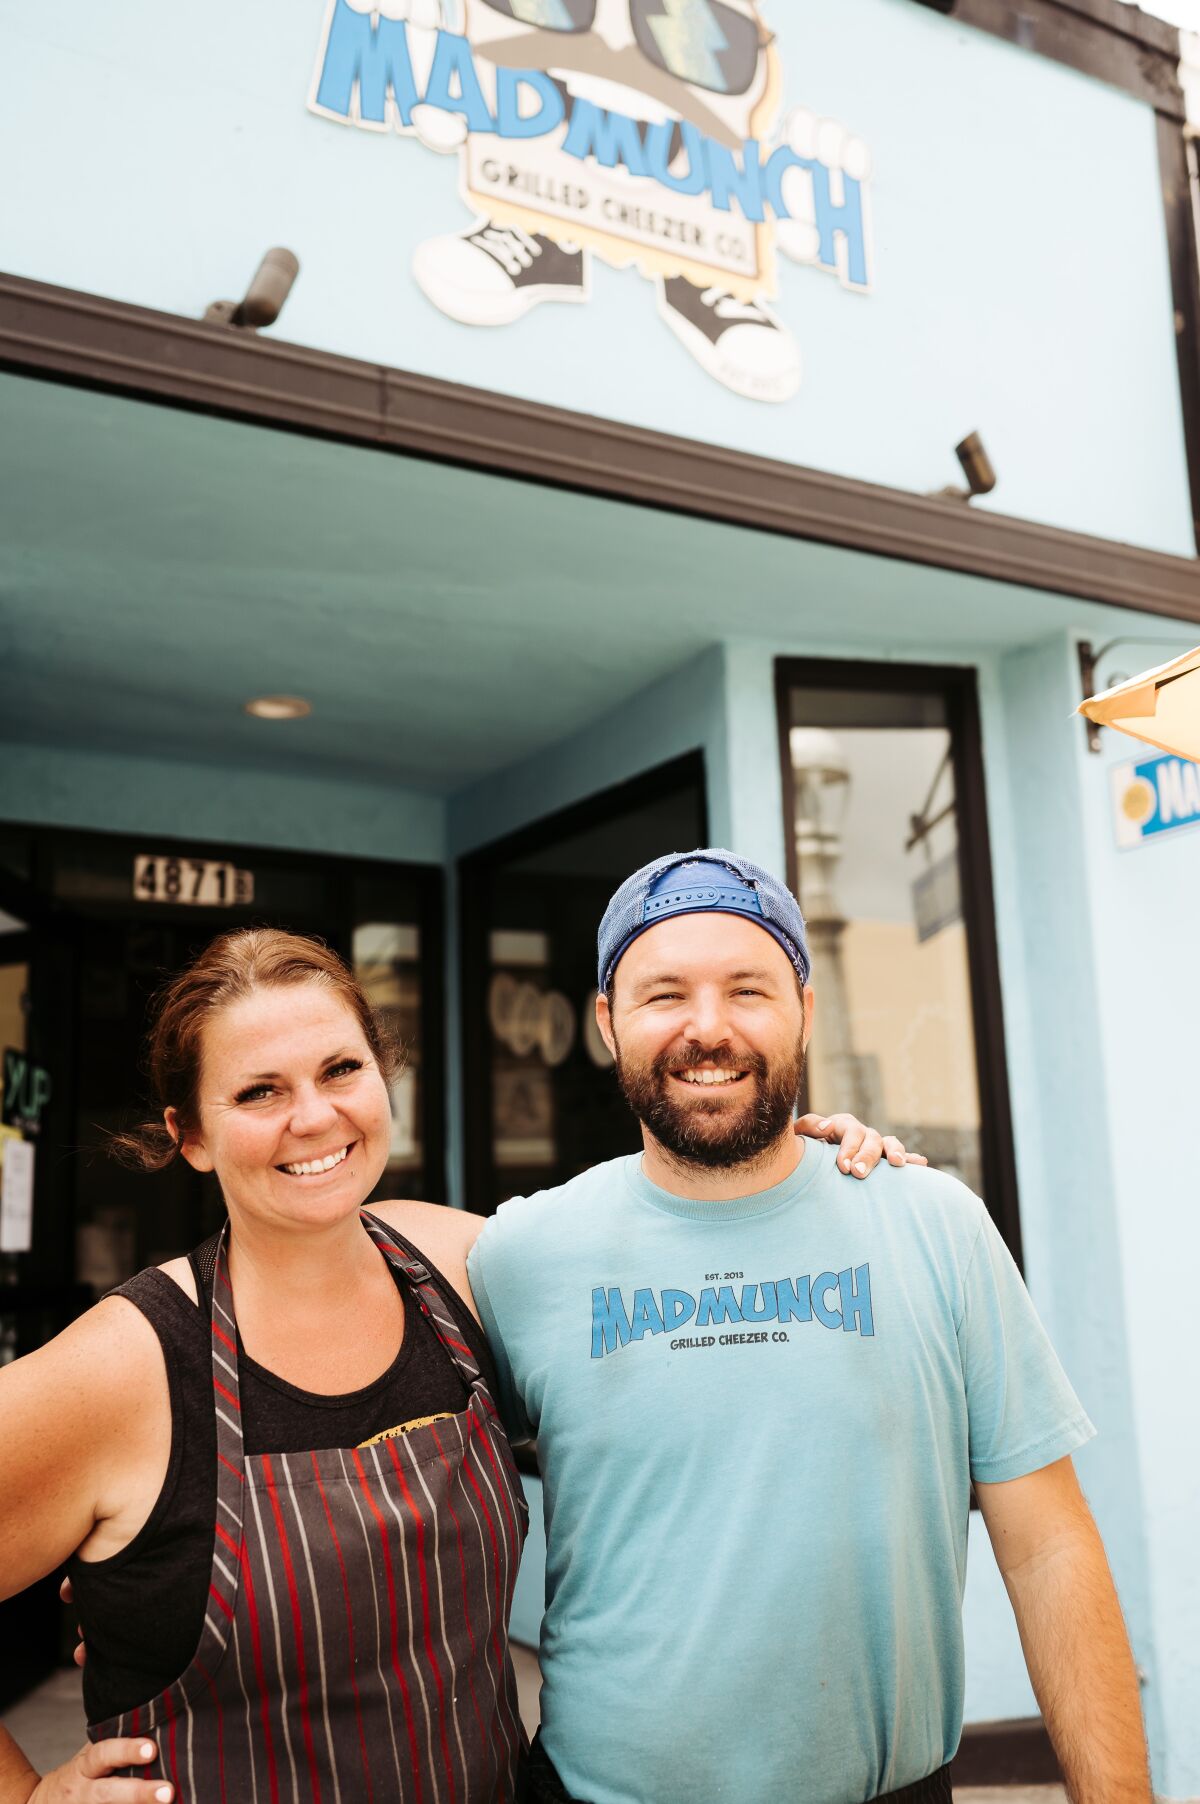 Husband and wife Kate and Zach Heinz started Mad Munch Grilled Cheezer Co. from an idea Zach had in 2003.